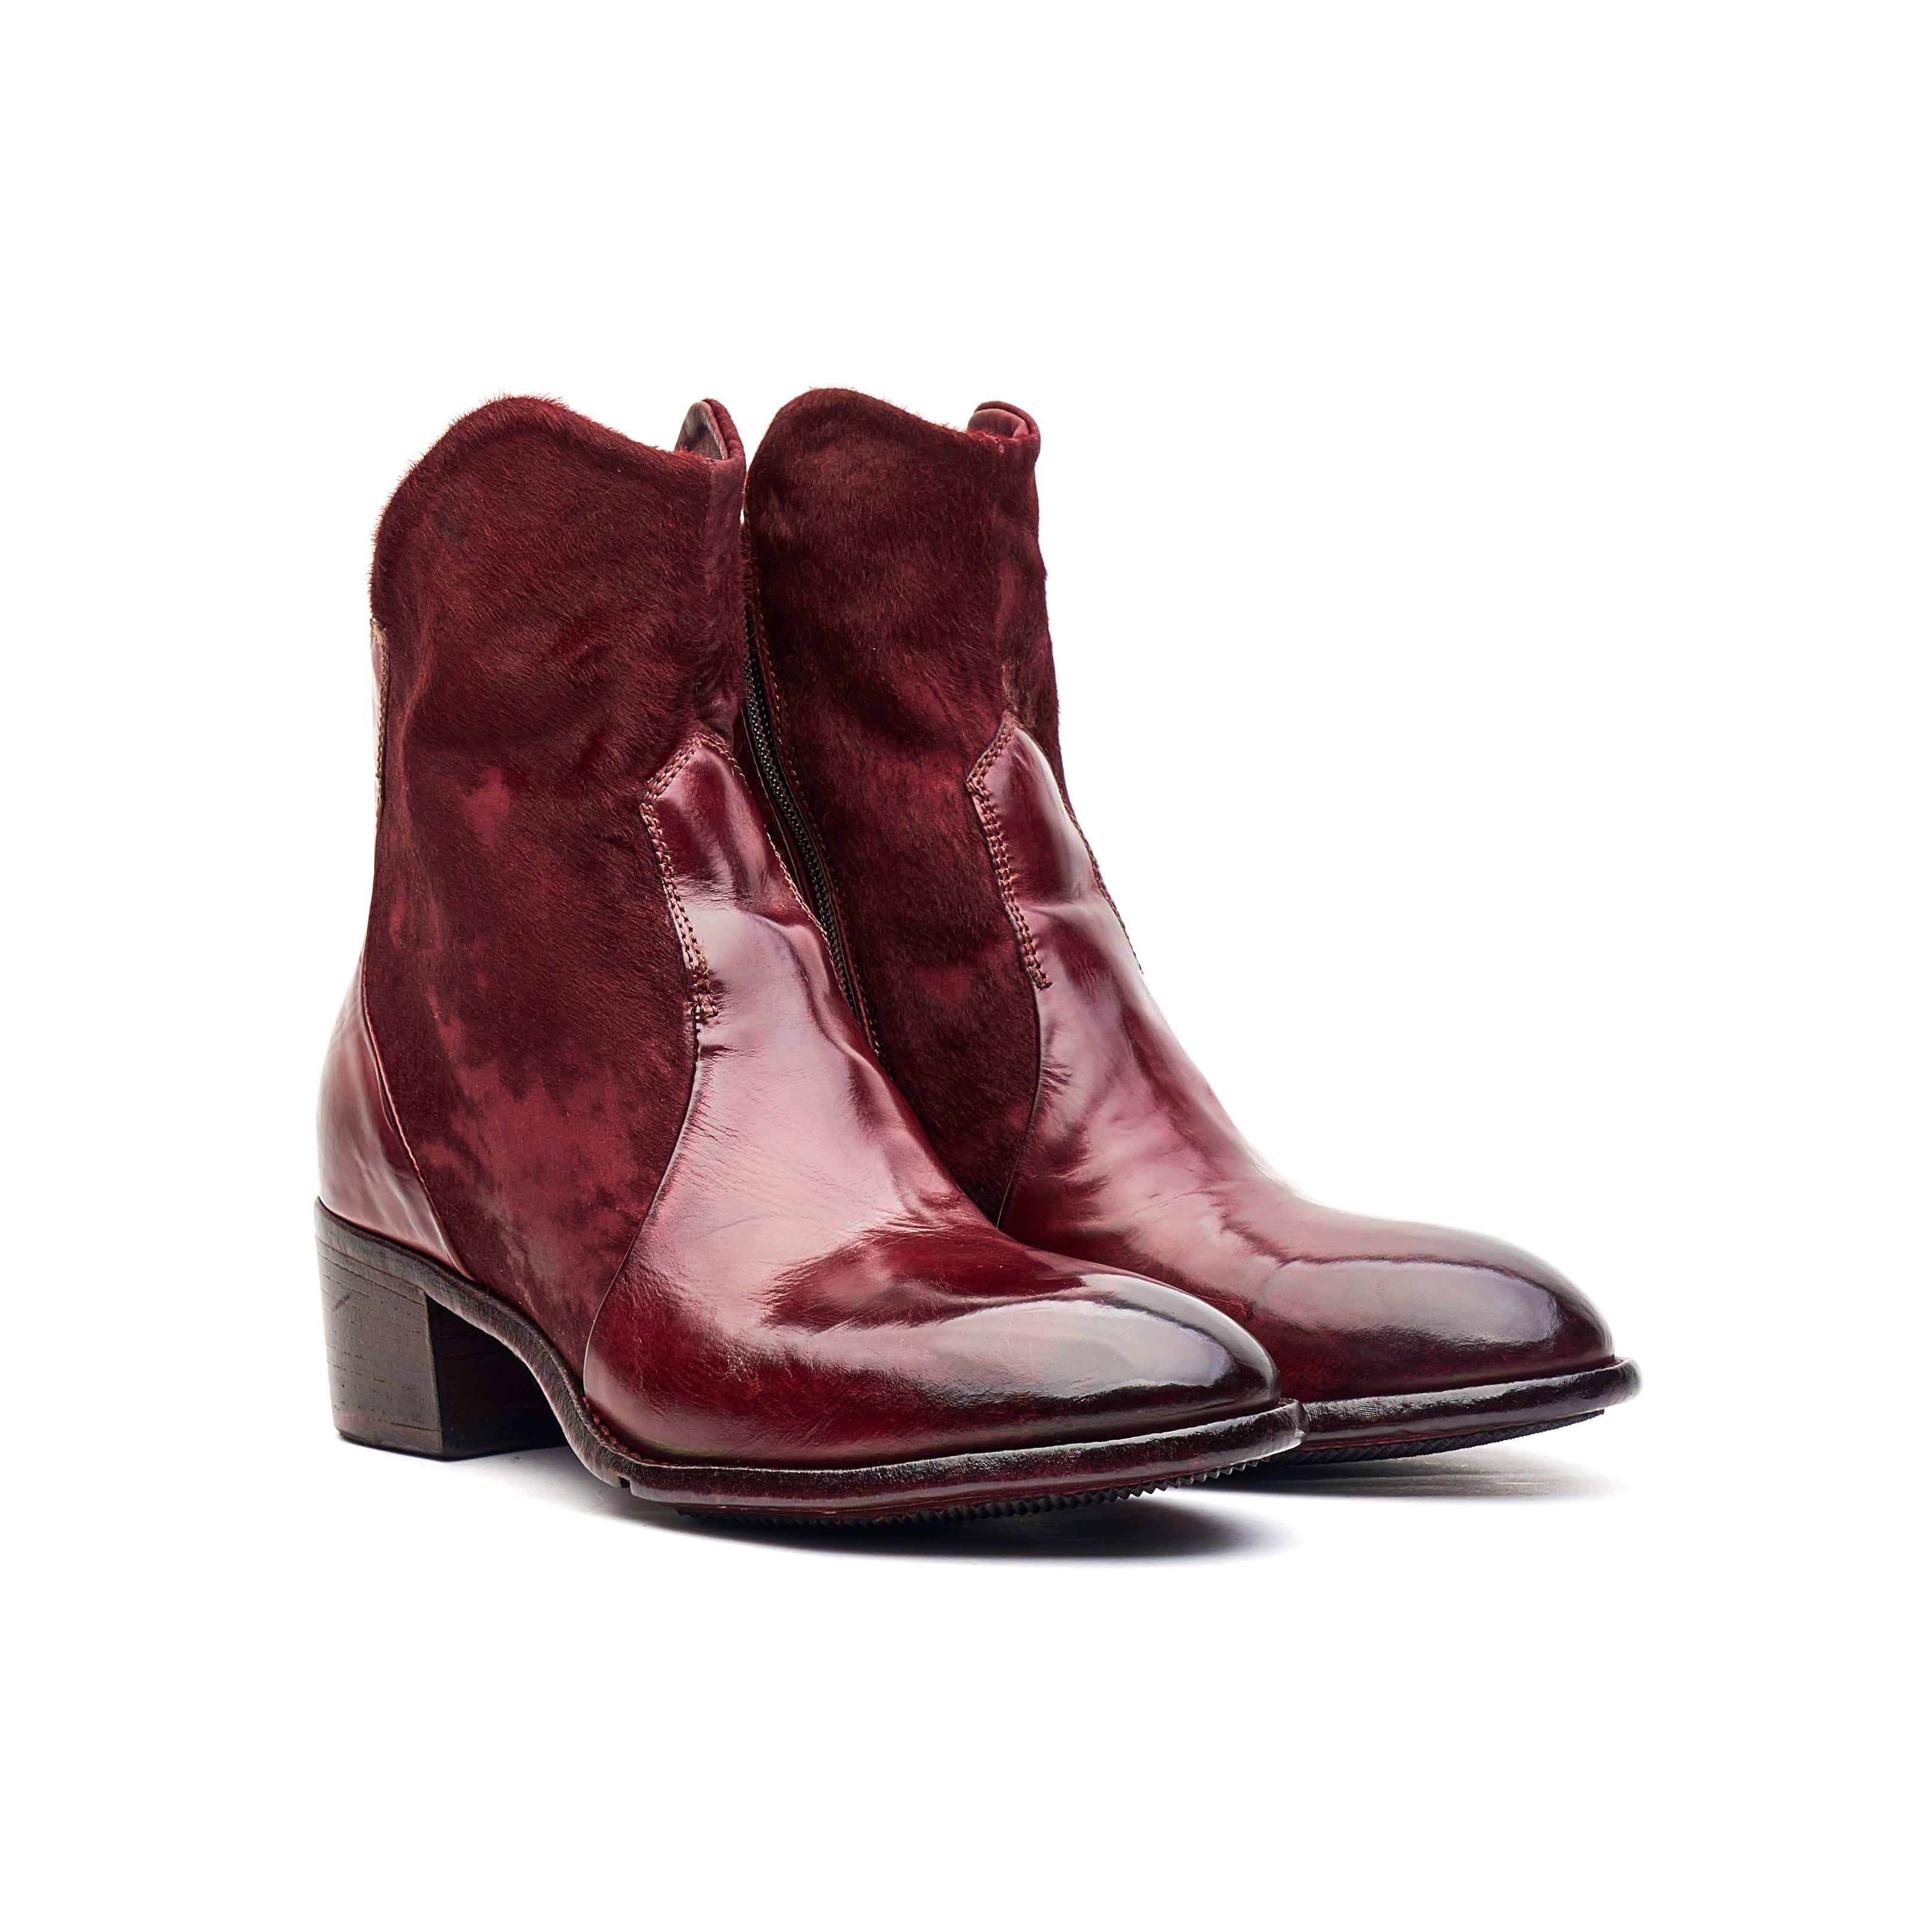 Lemargo AP12B Burgundy Womens Ankle Boot - 124 Shoes